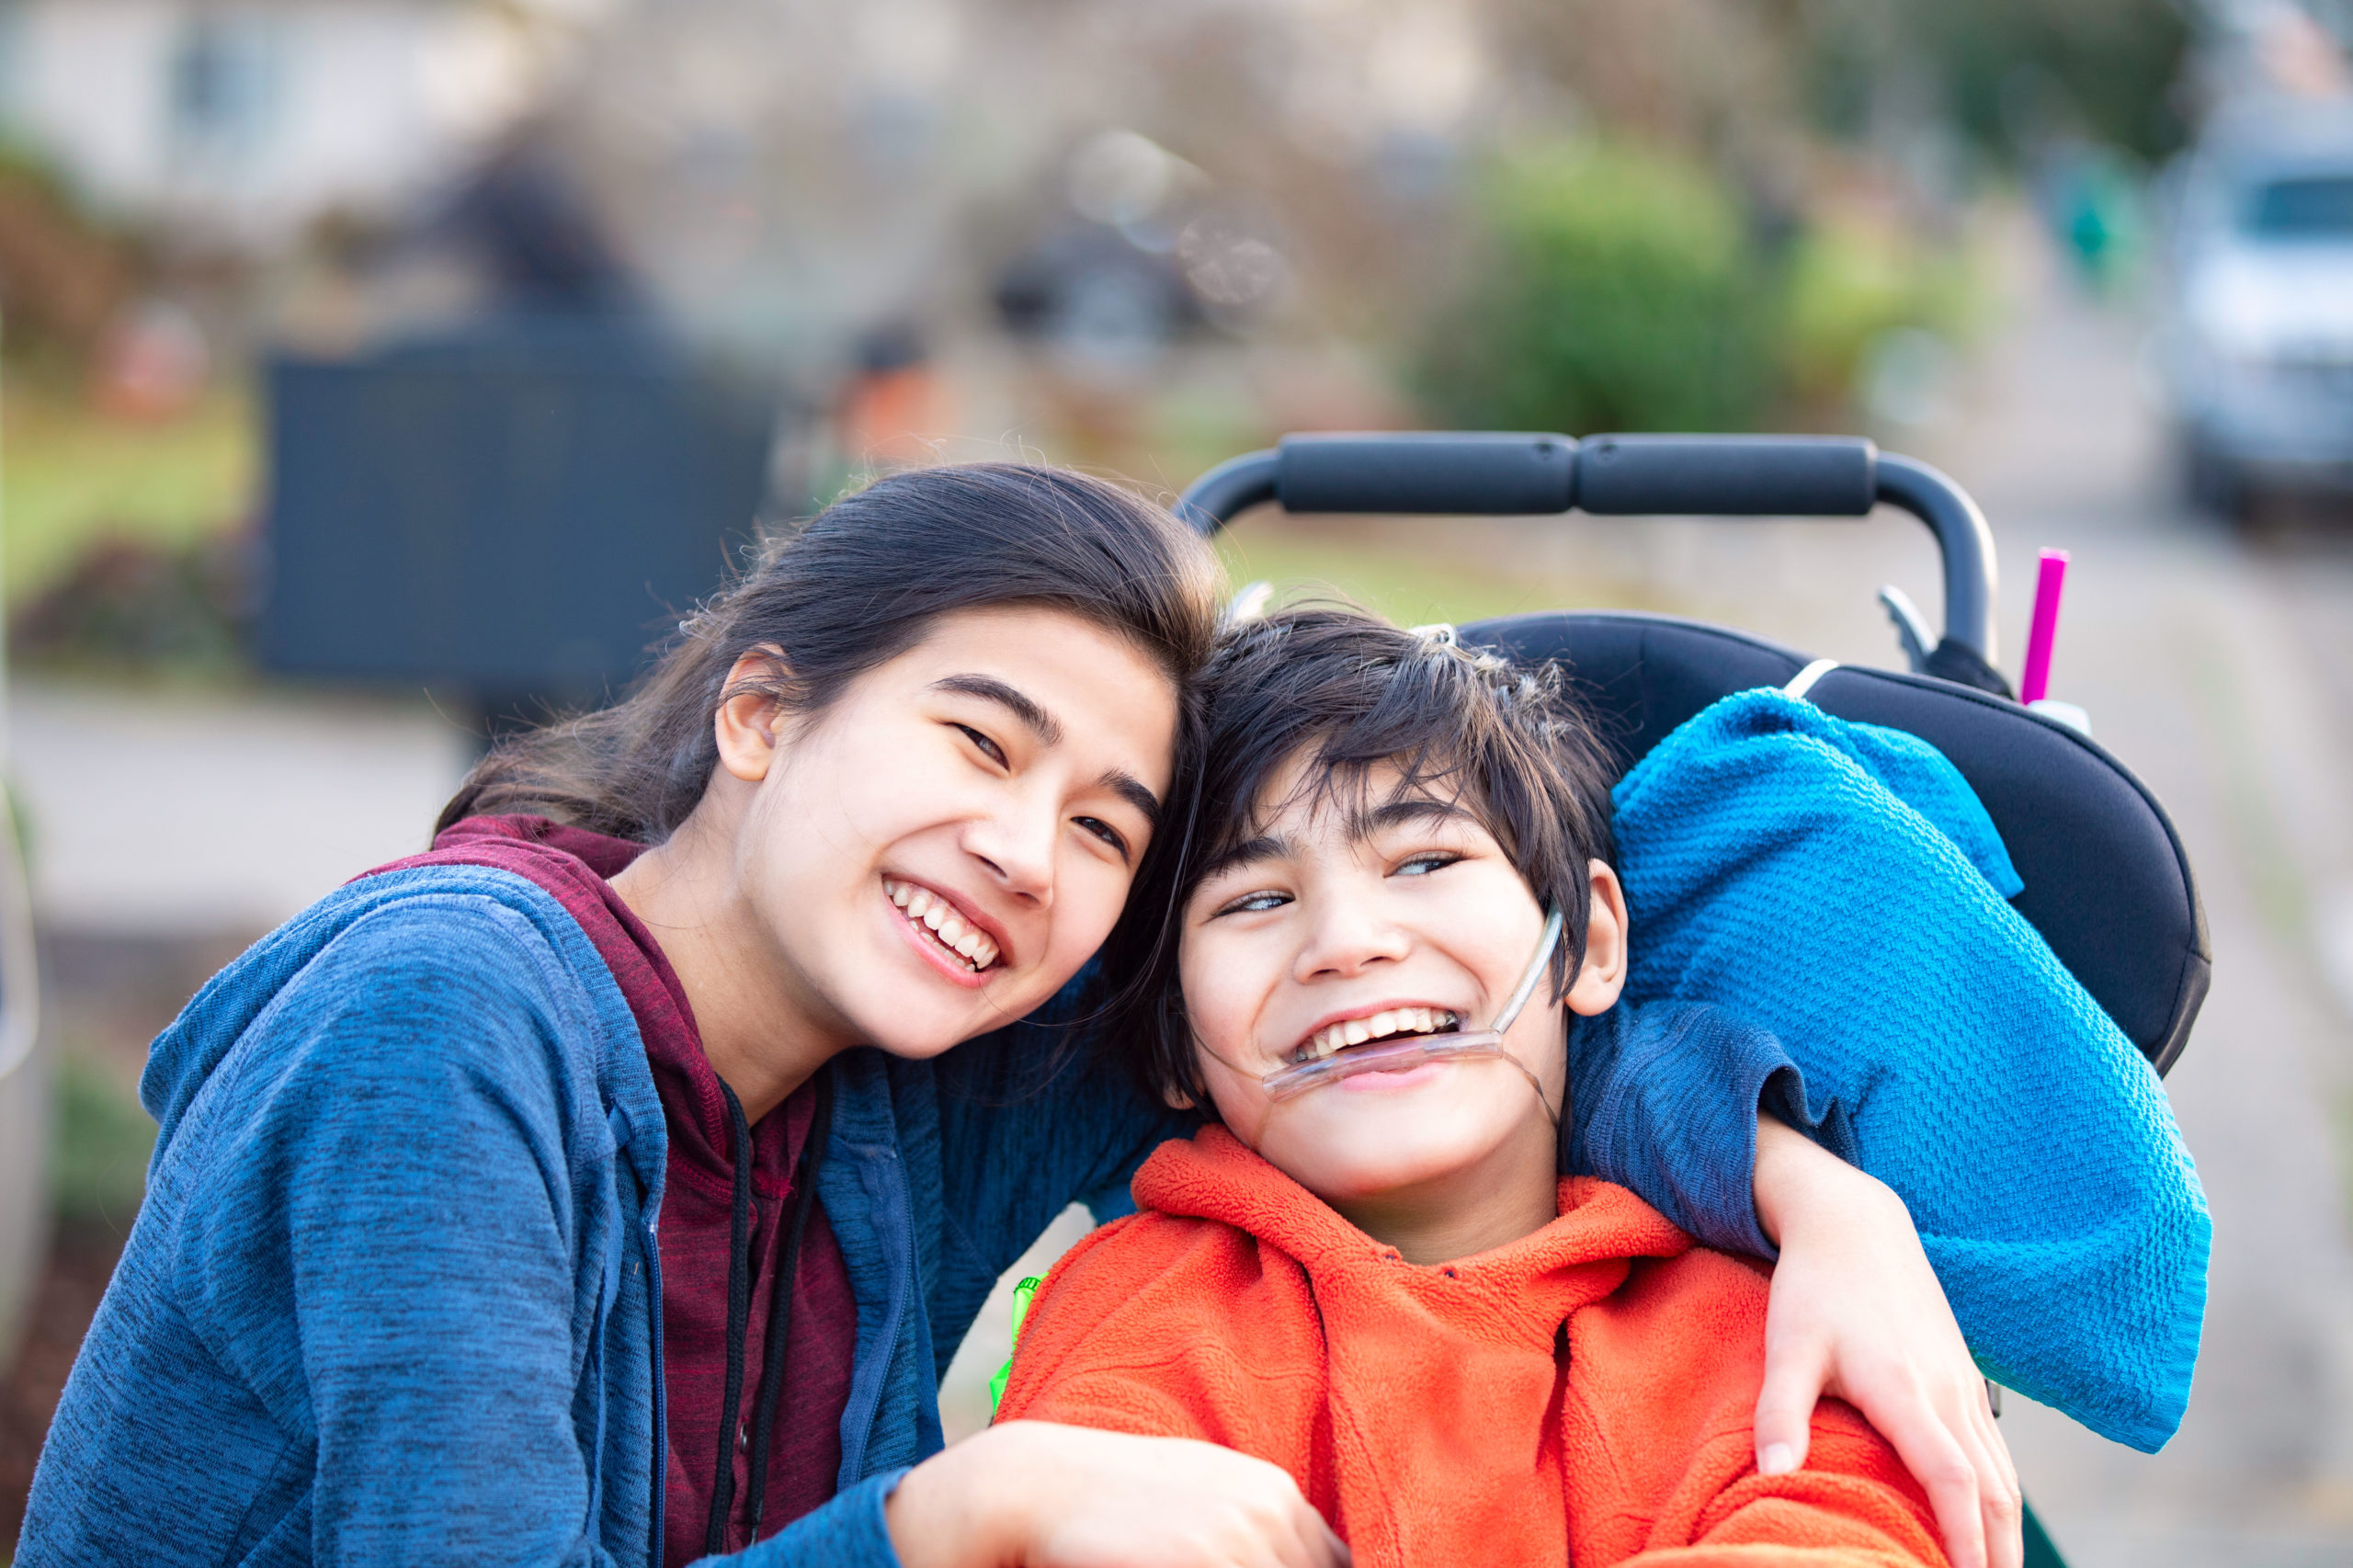 Biracial big sister lovingly hugging disabled little brother in wheelchairoutdoors, smiling